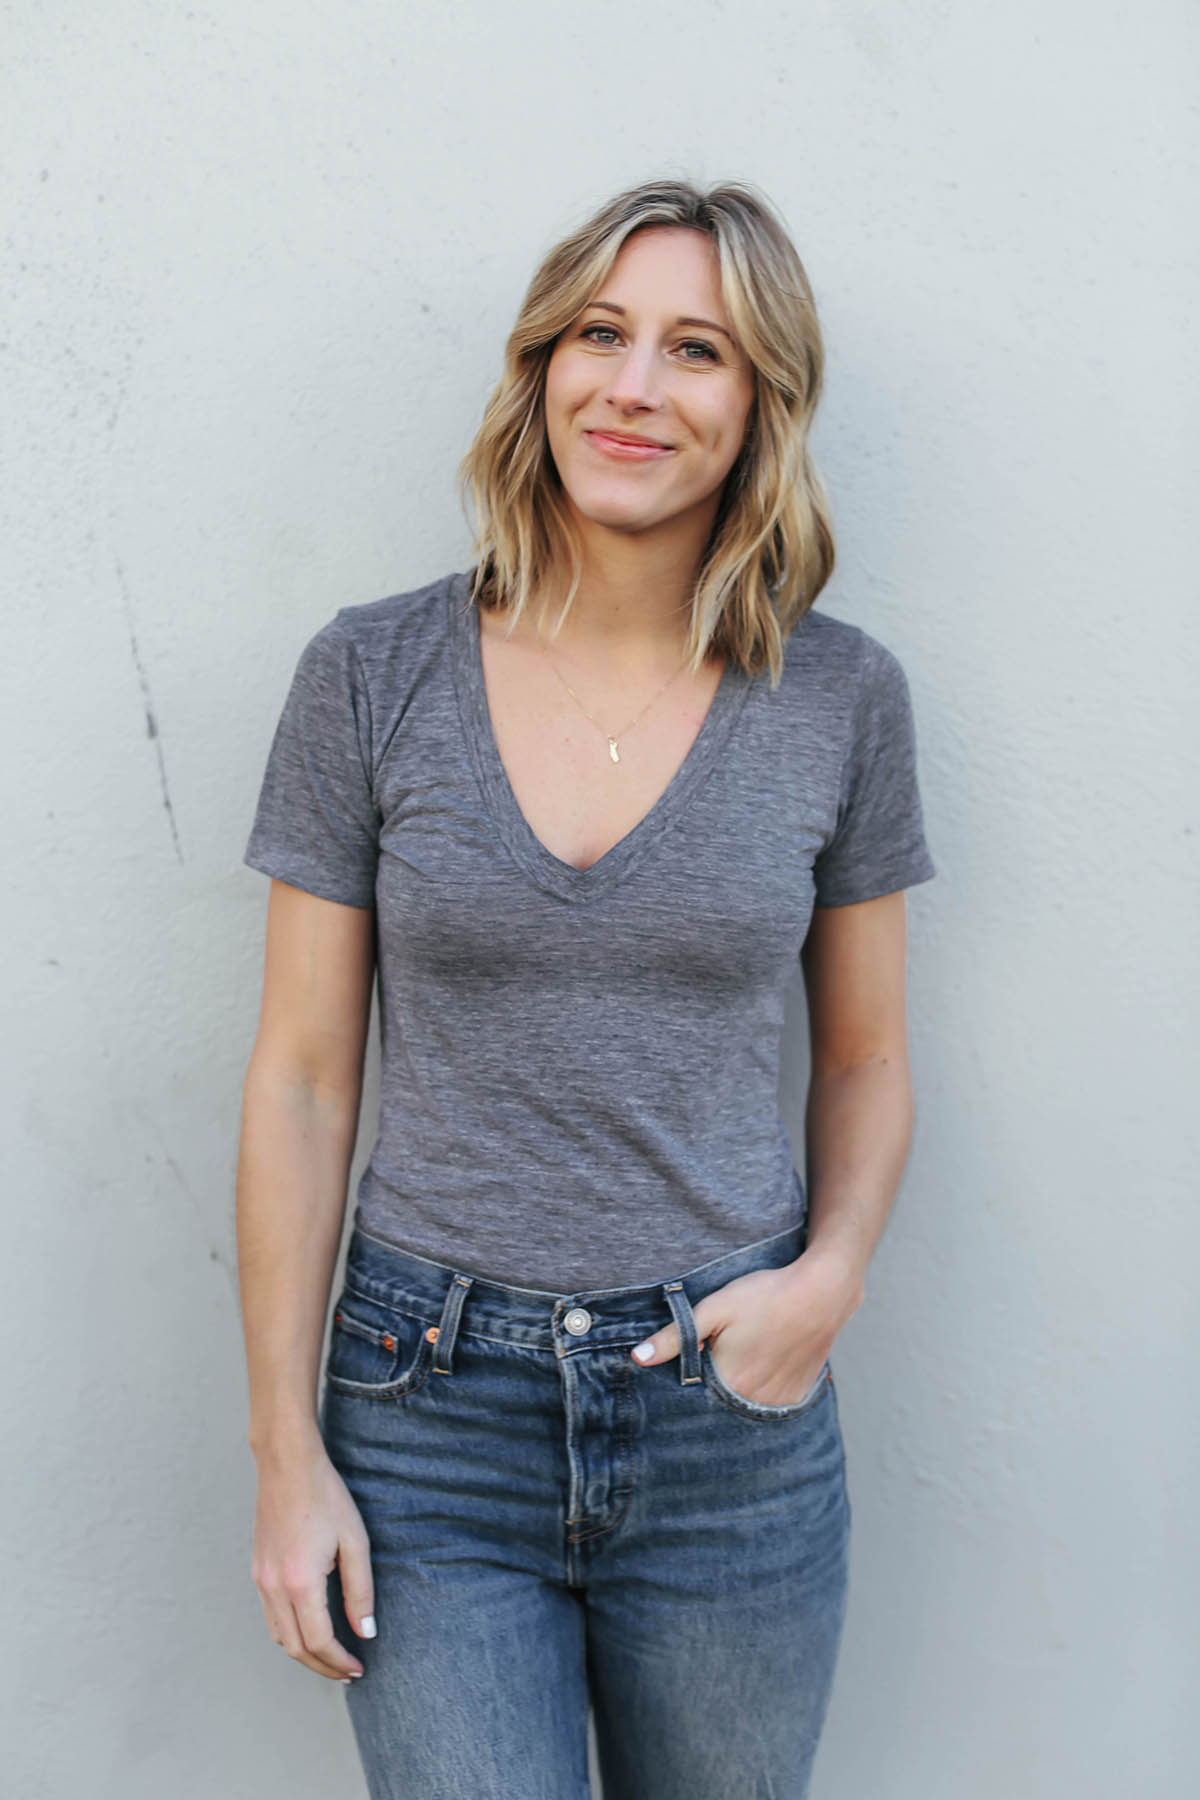 gray t-shirt and jeans